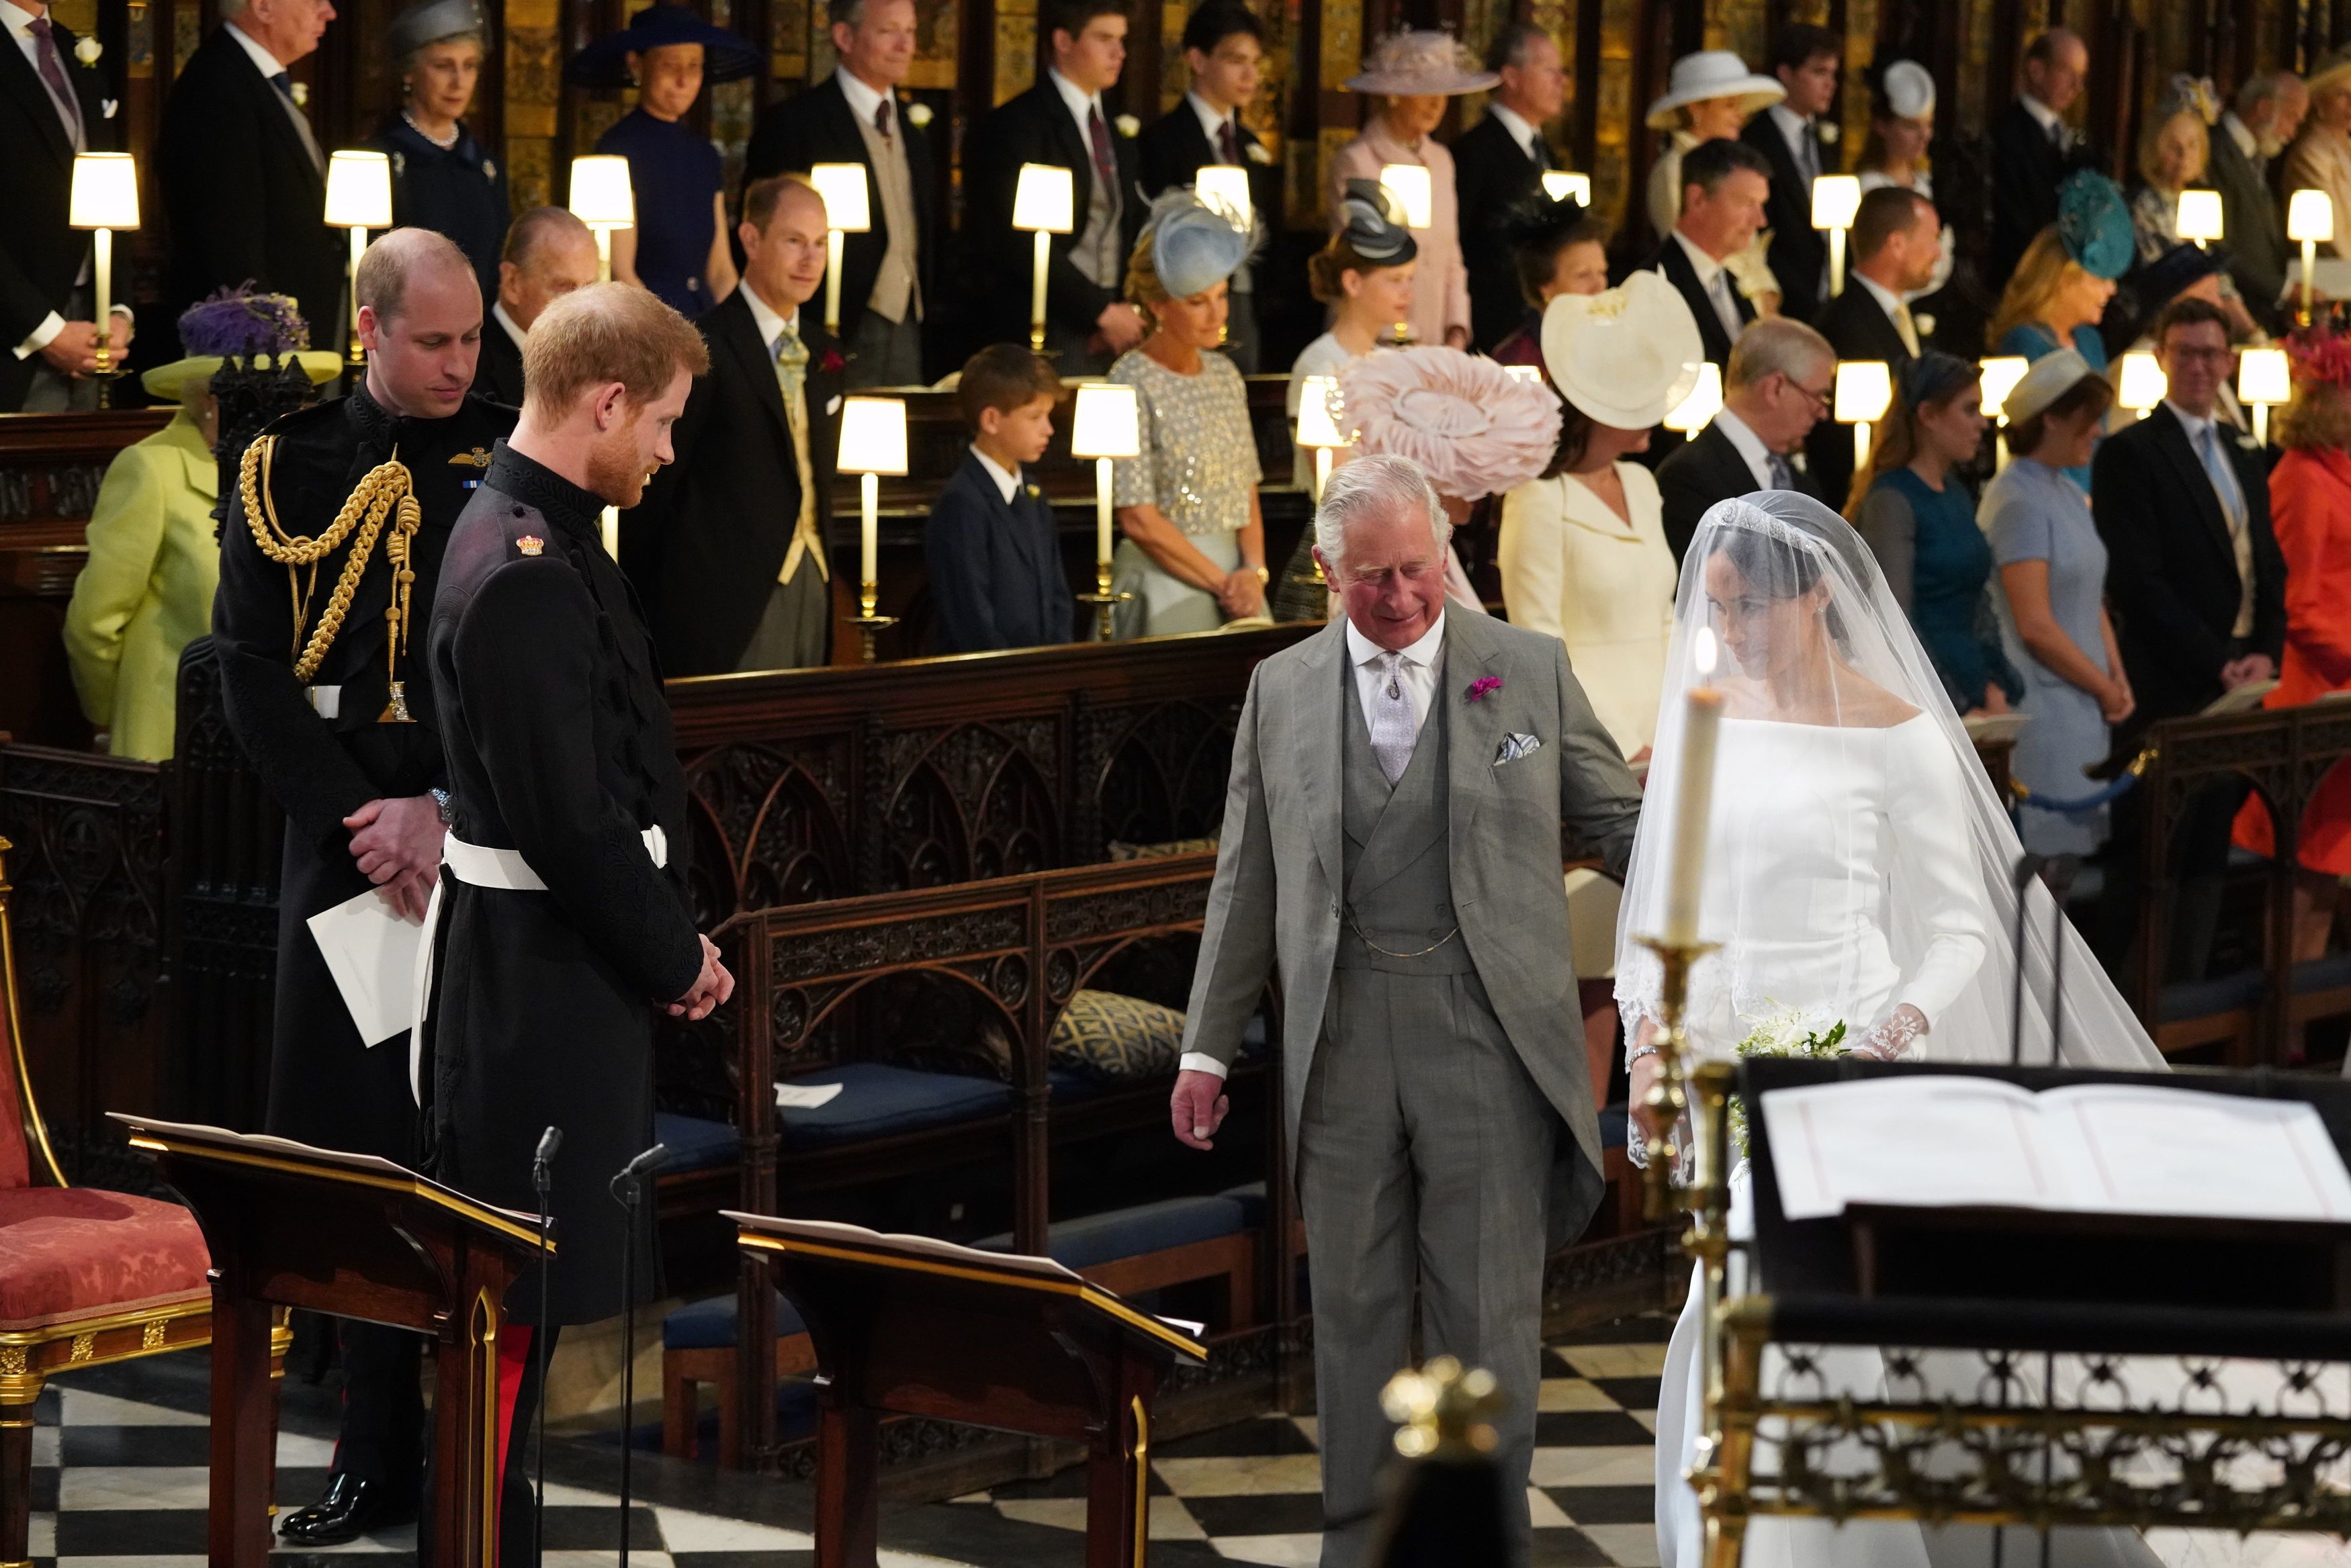 Prince Harry looks at his bride, Meghan Markle, as she arrives at the altar accompanied by Prince Charles, Prince of Wales | Source: Getty Images 